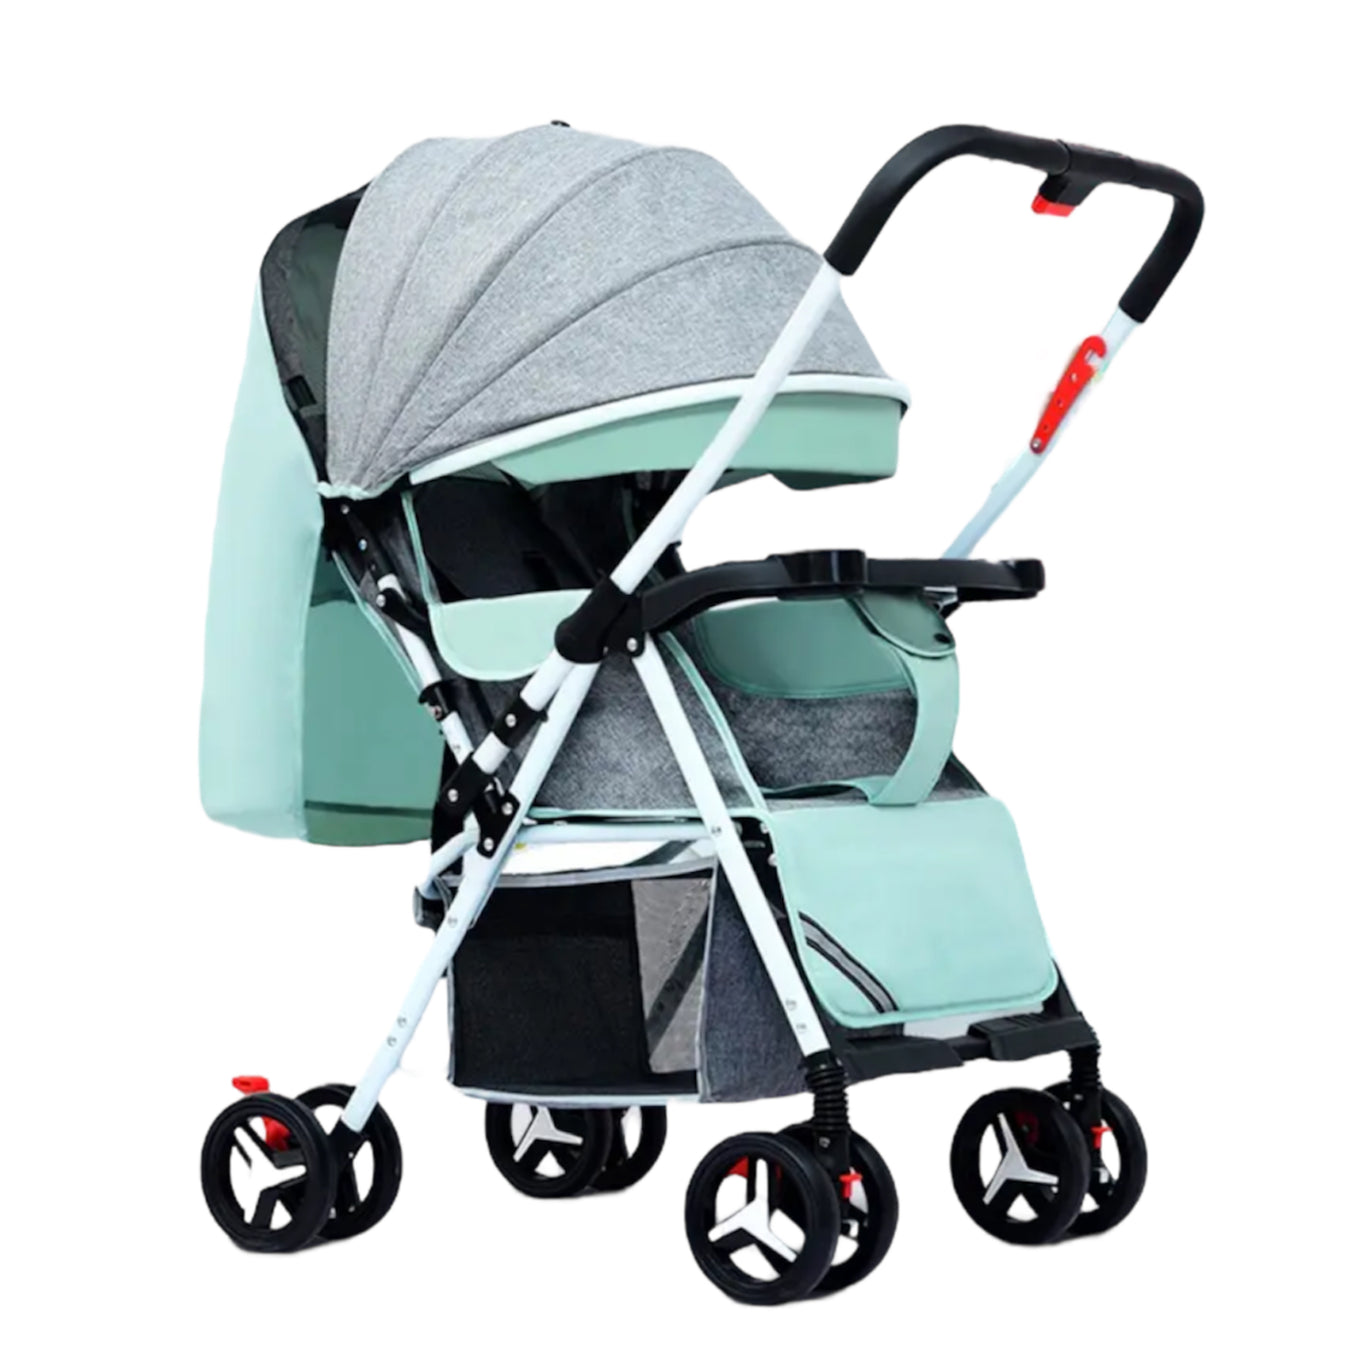 Full Size Strollers